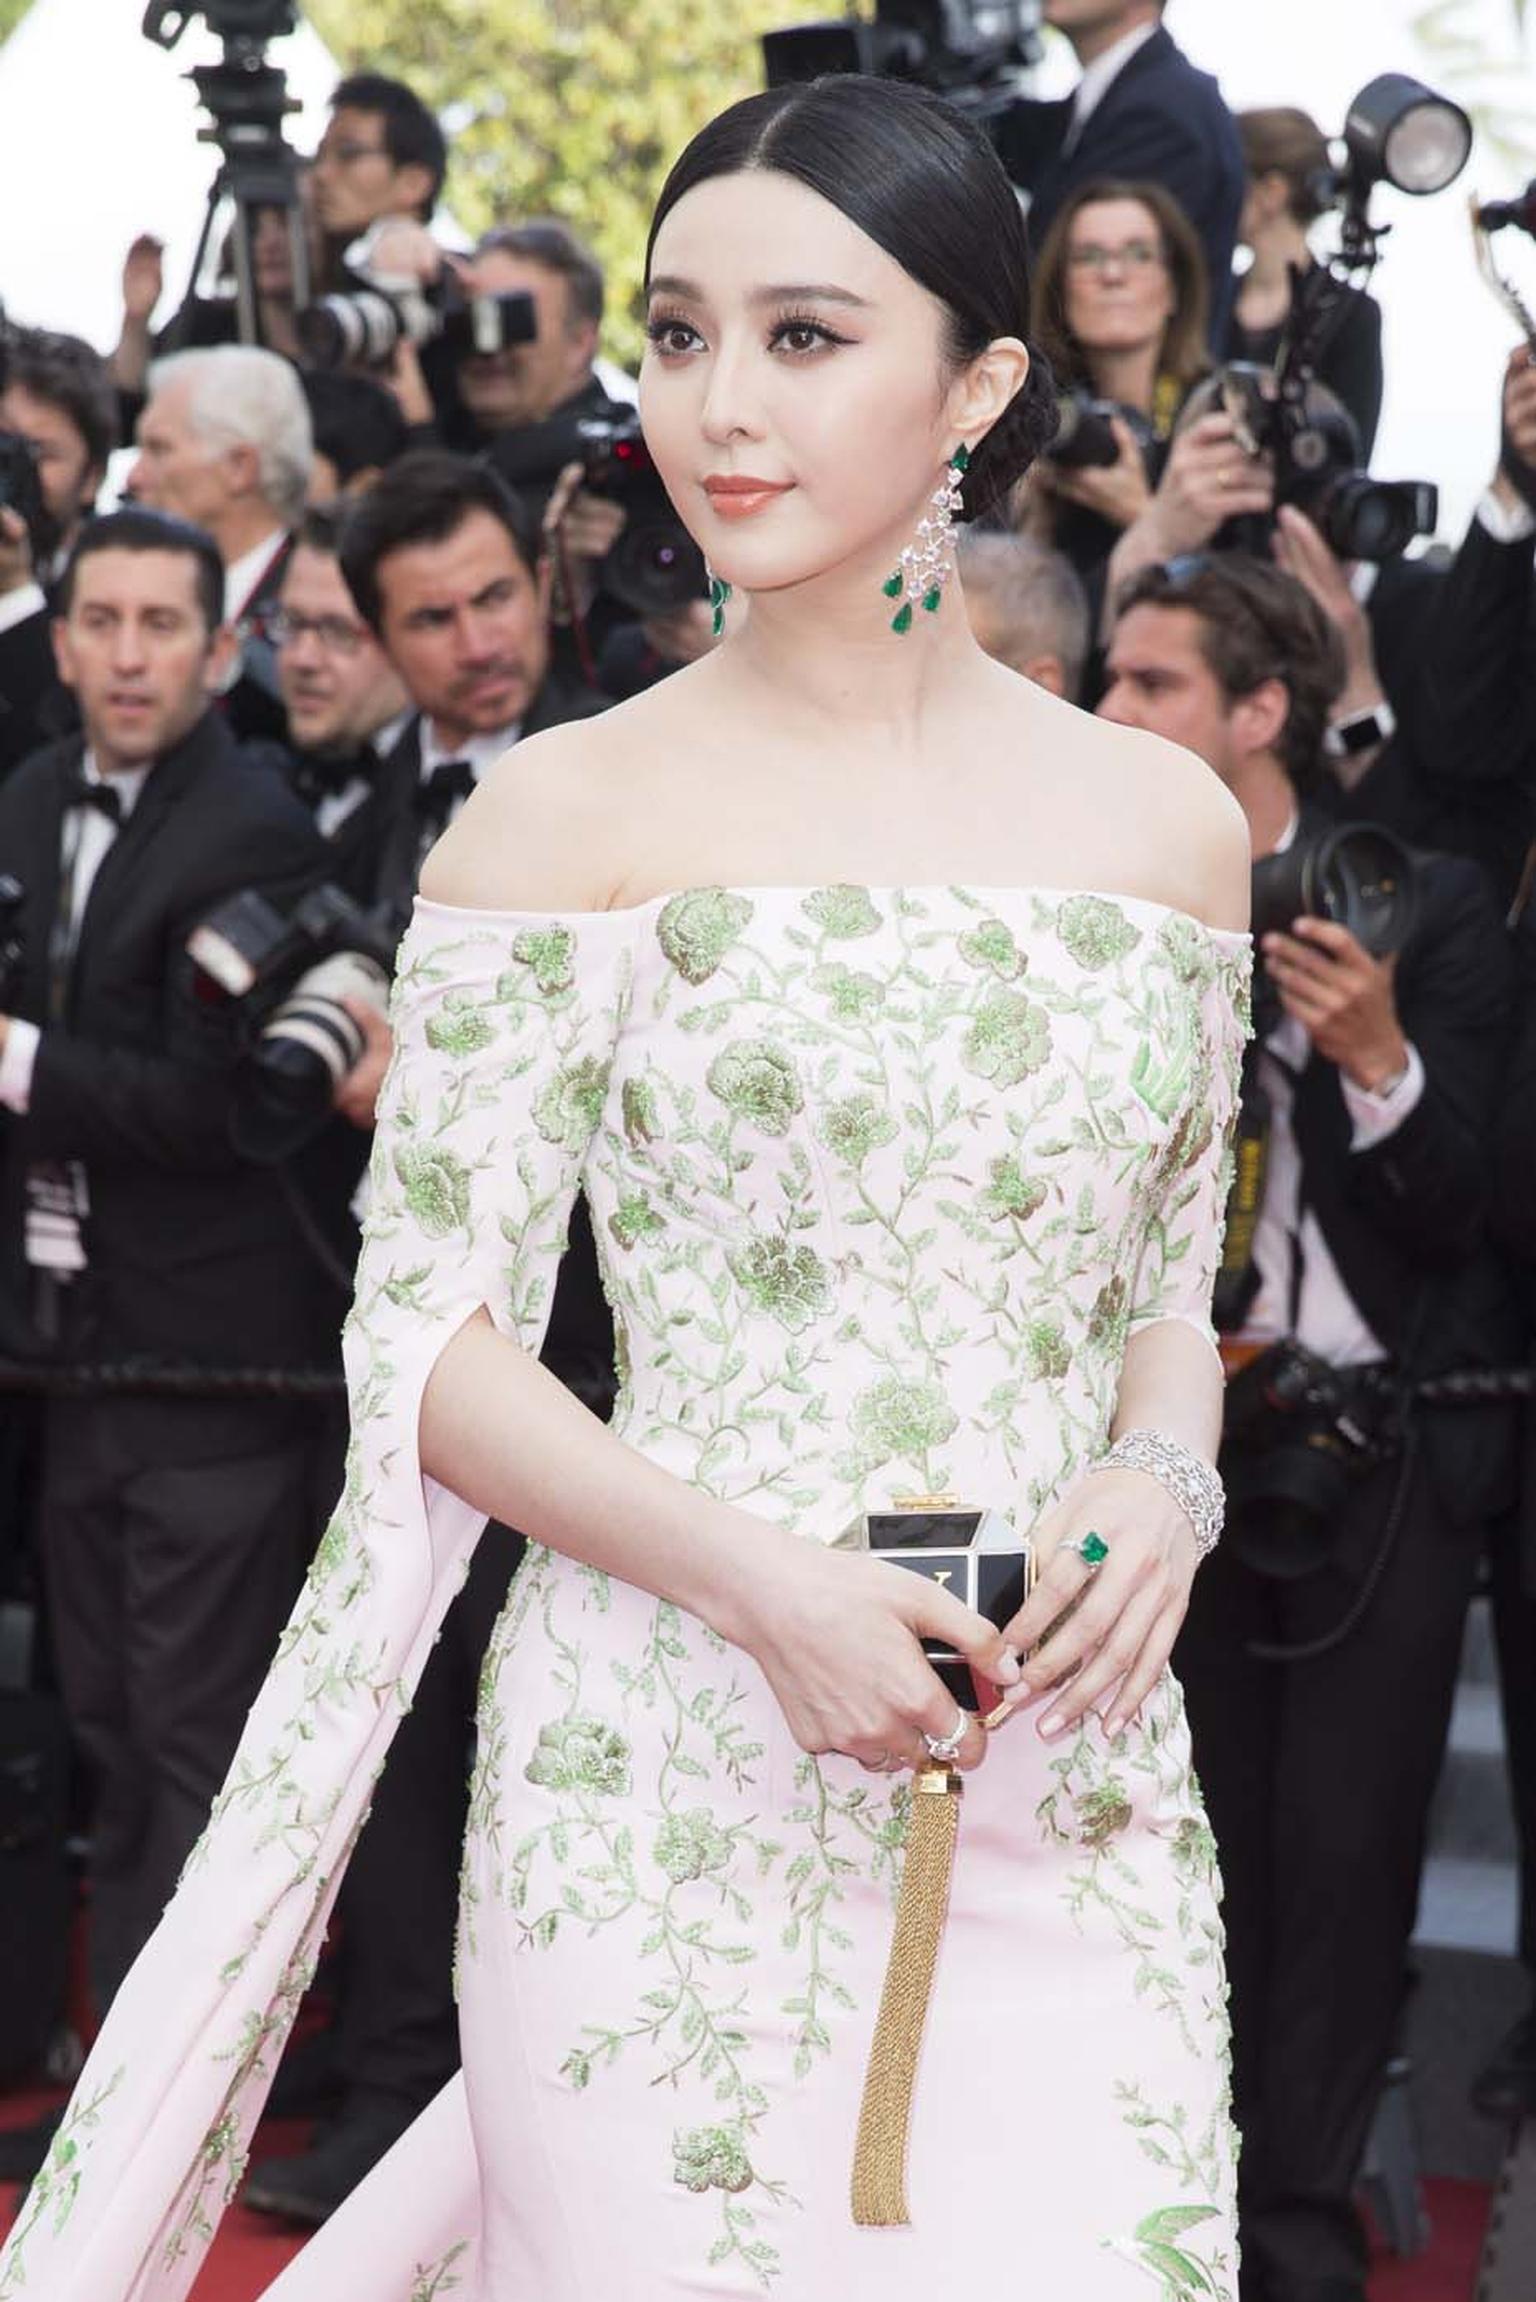 One of our favourite Cannes jewellery looks from the opening day was Chinese actress Fan Bingbing, who looked radiant in a pair of emerald Chopard earrings and an emerald ring from the Red Carpet collection, which matched her green and white floral Ralph 